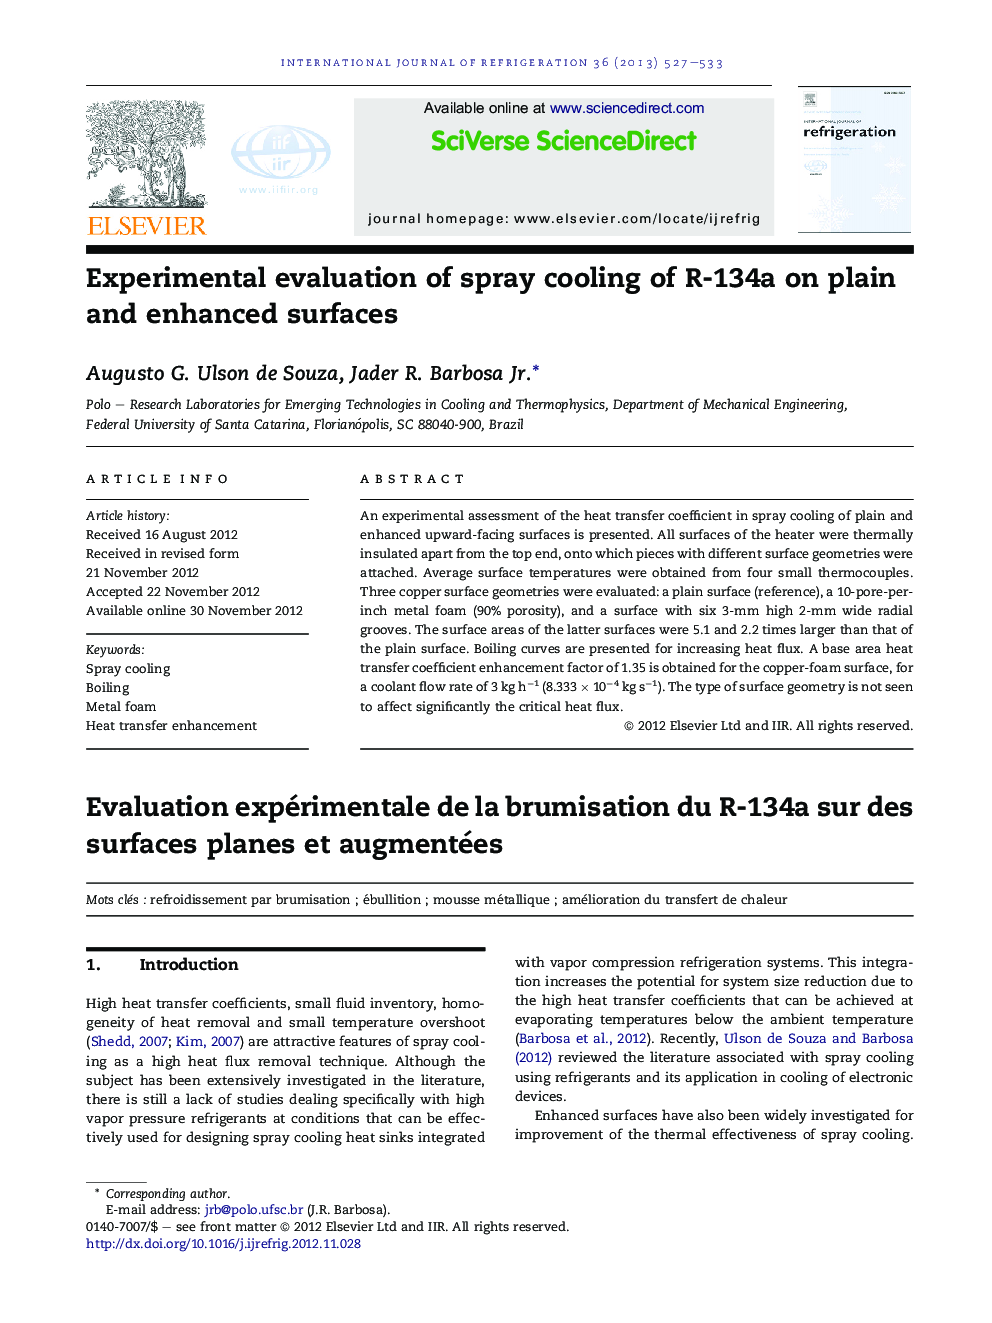 Experimental evaluation of spray cooling of R-134a on plain and enhanced surfaces